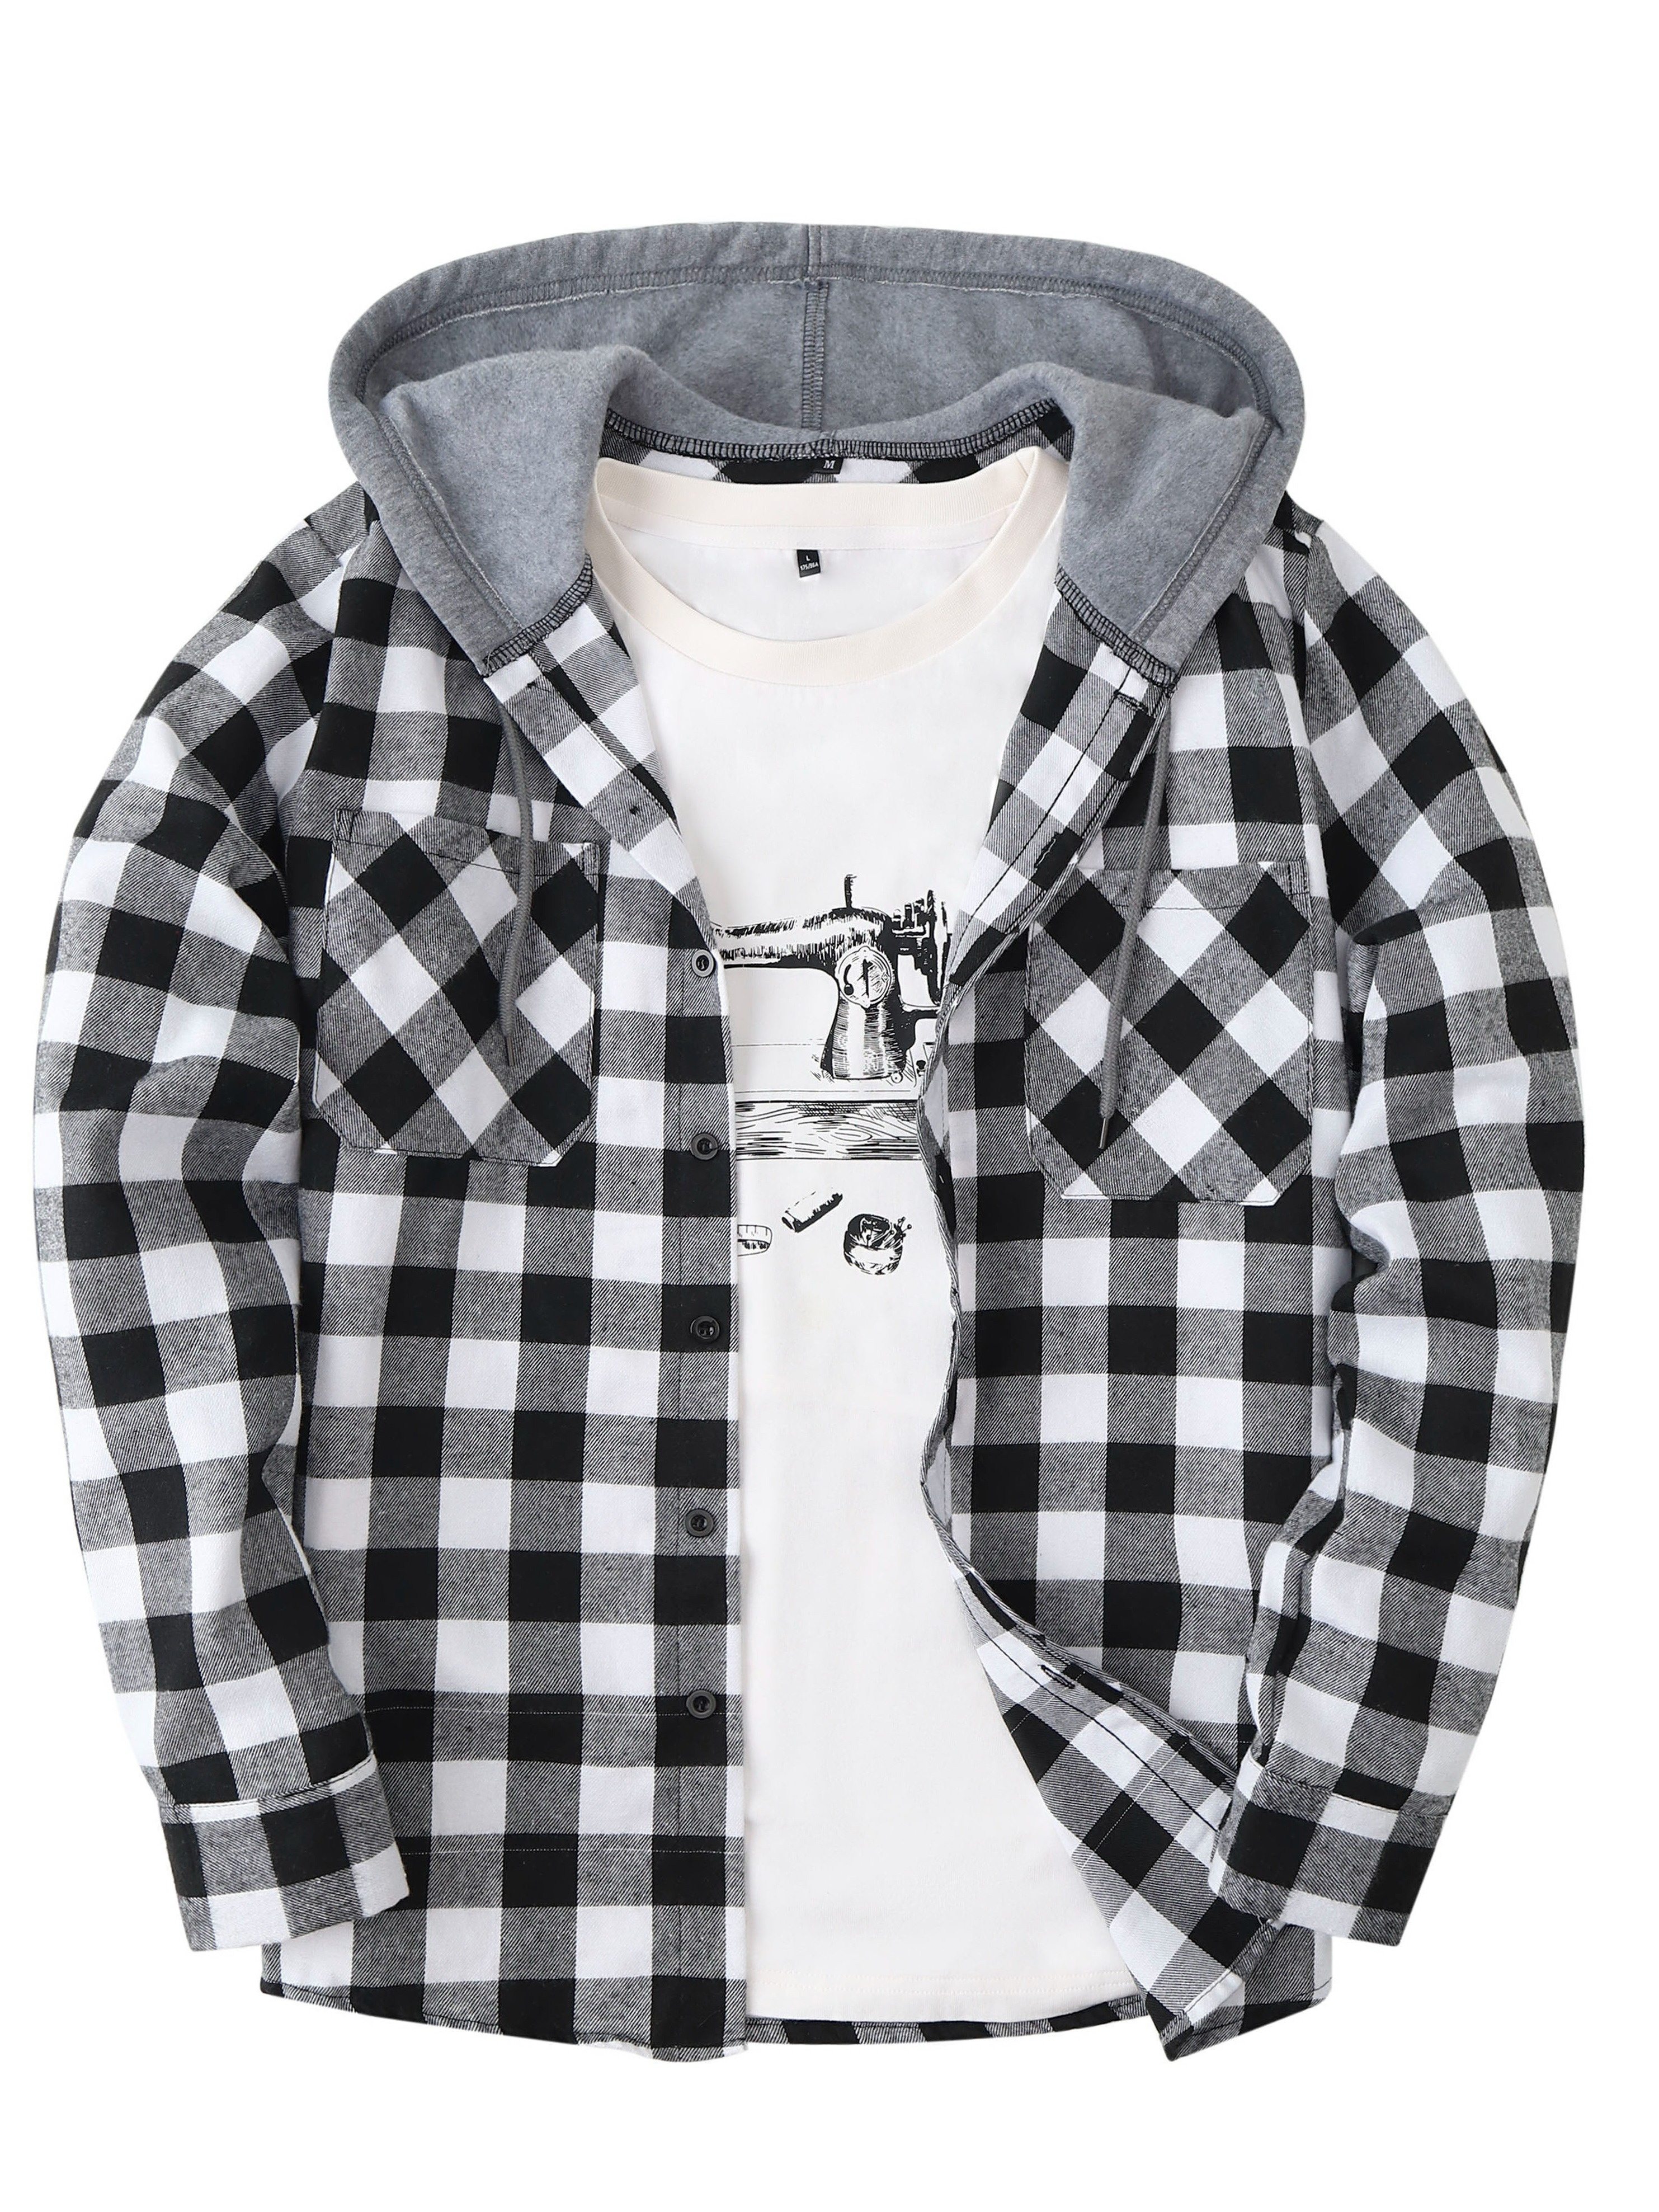 long sleeve casual regular fit button up hooded shirts jacket plaid shirt coat for men details 45